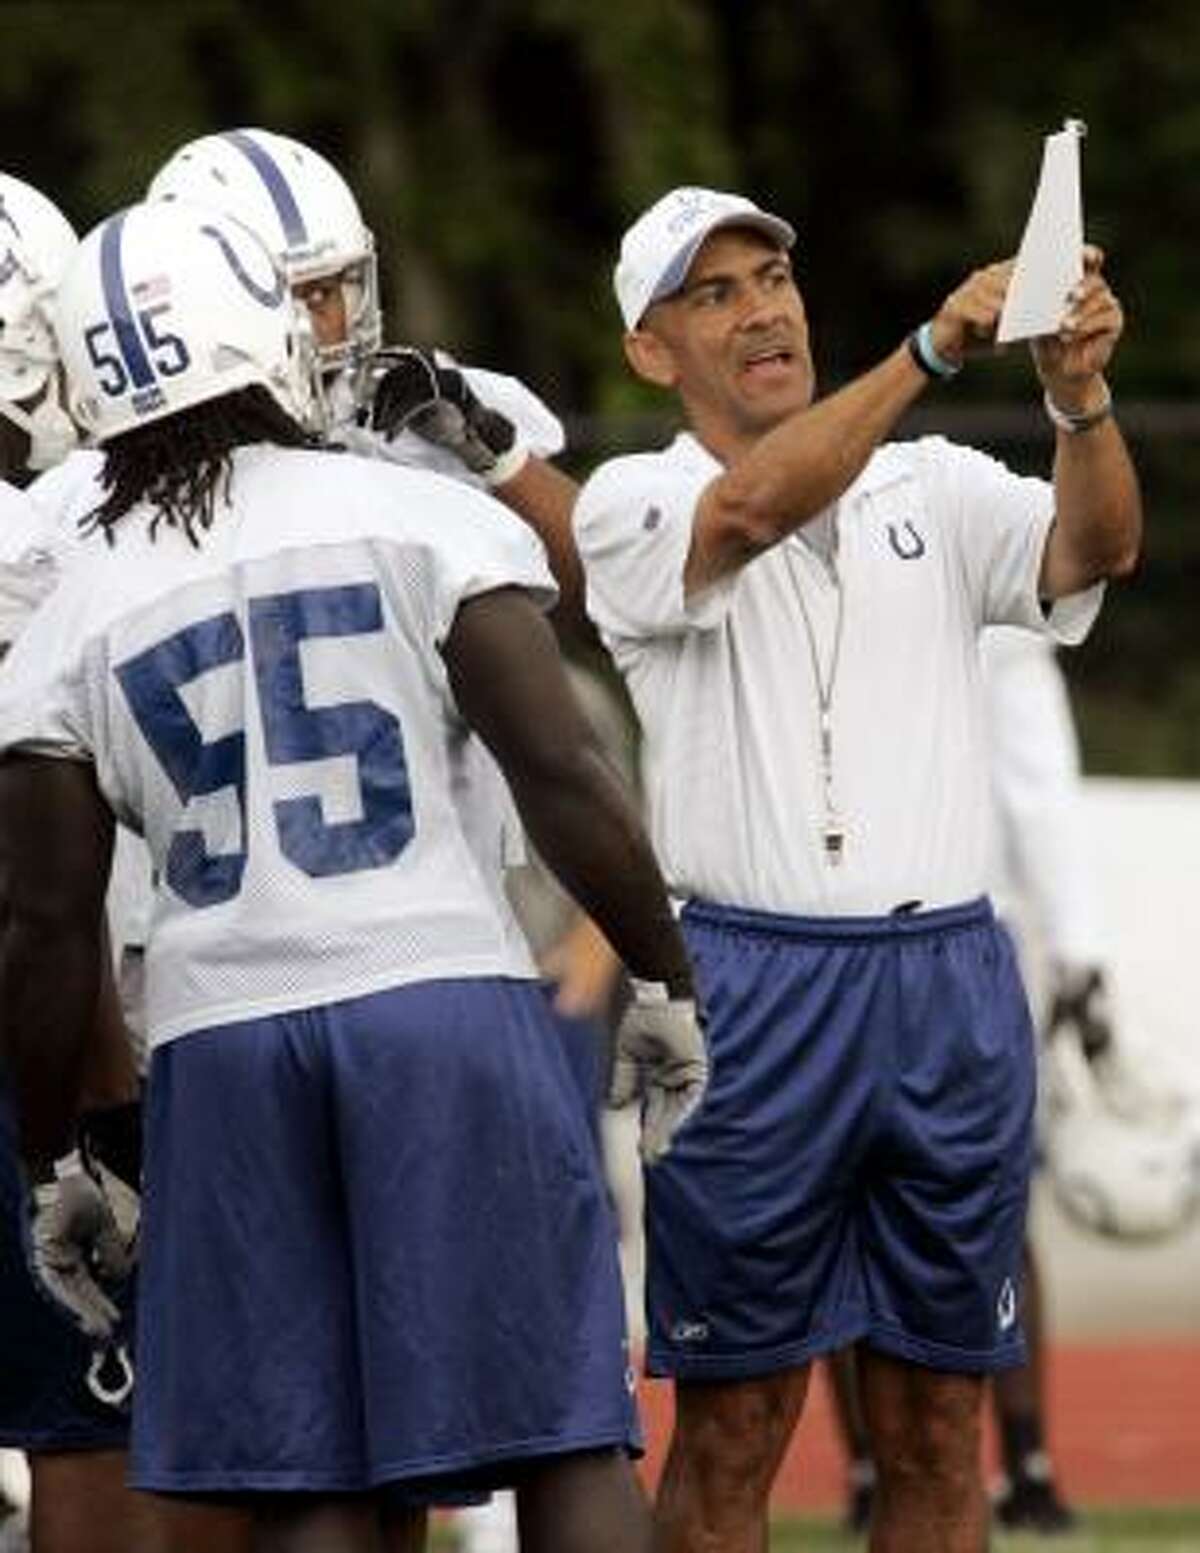 COLTS (Terre Haute, Ind.): Coach Tony Dungy, right, goes over a play with linebacker Clint Session (55) and other players during practice.